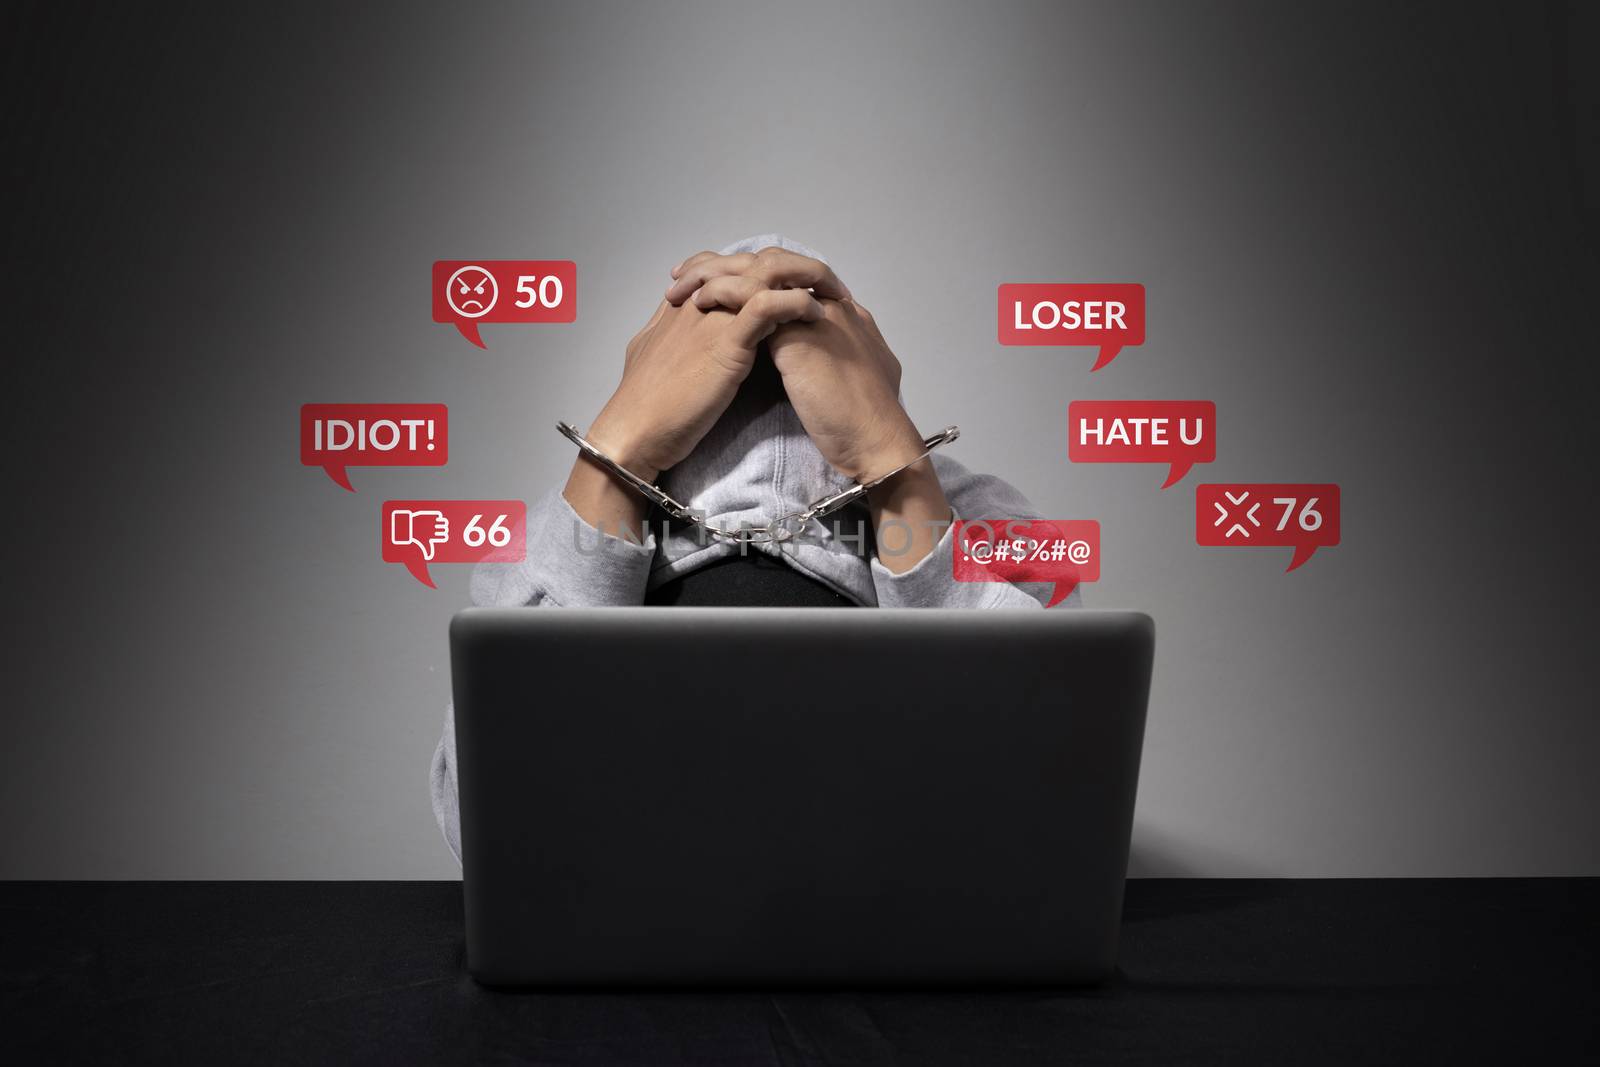 cyber bullying concept. A handcuffed man is accused of being a social defendant, bending his head in front of the laptop computer with hate speech as a cyber bullying popup message from social media. by asiandelight